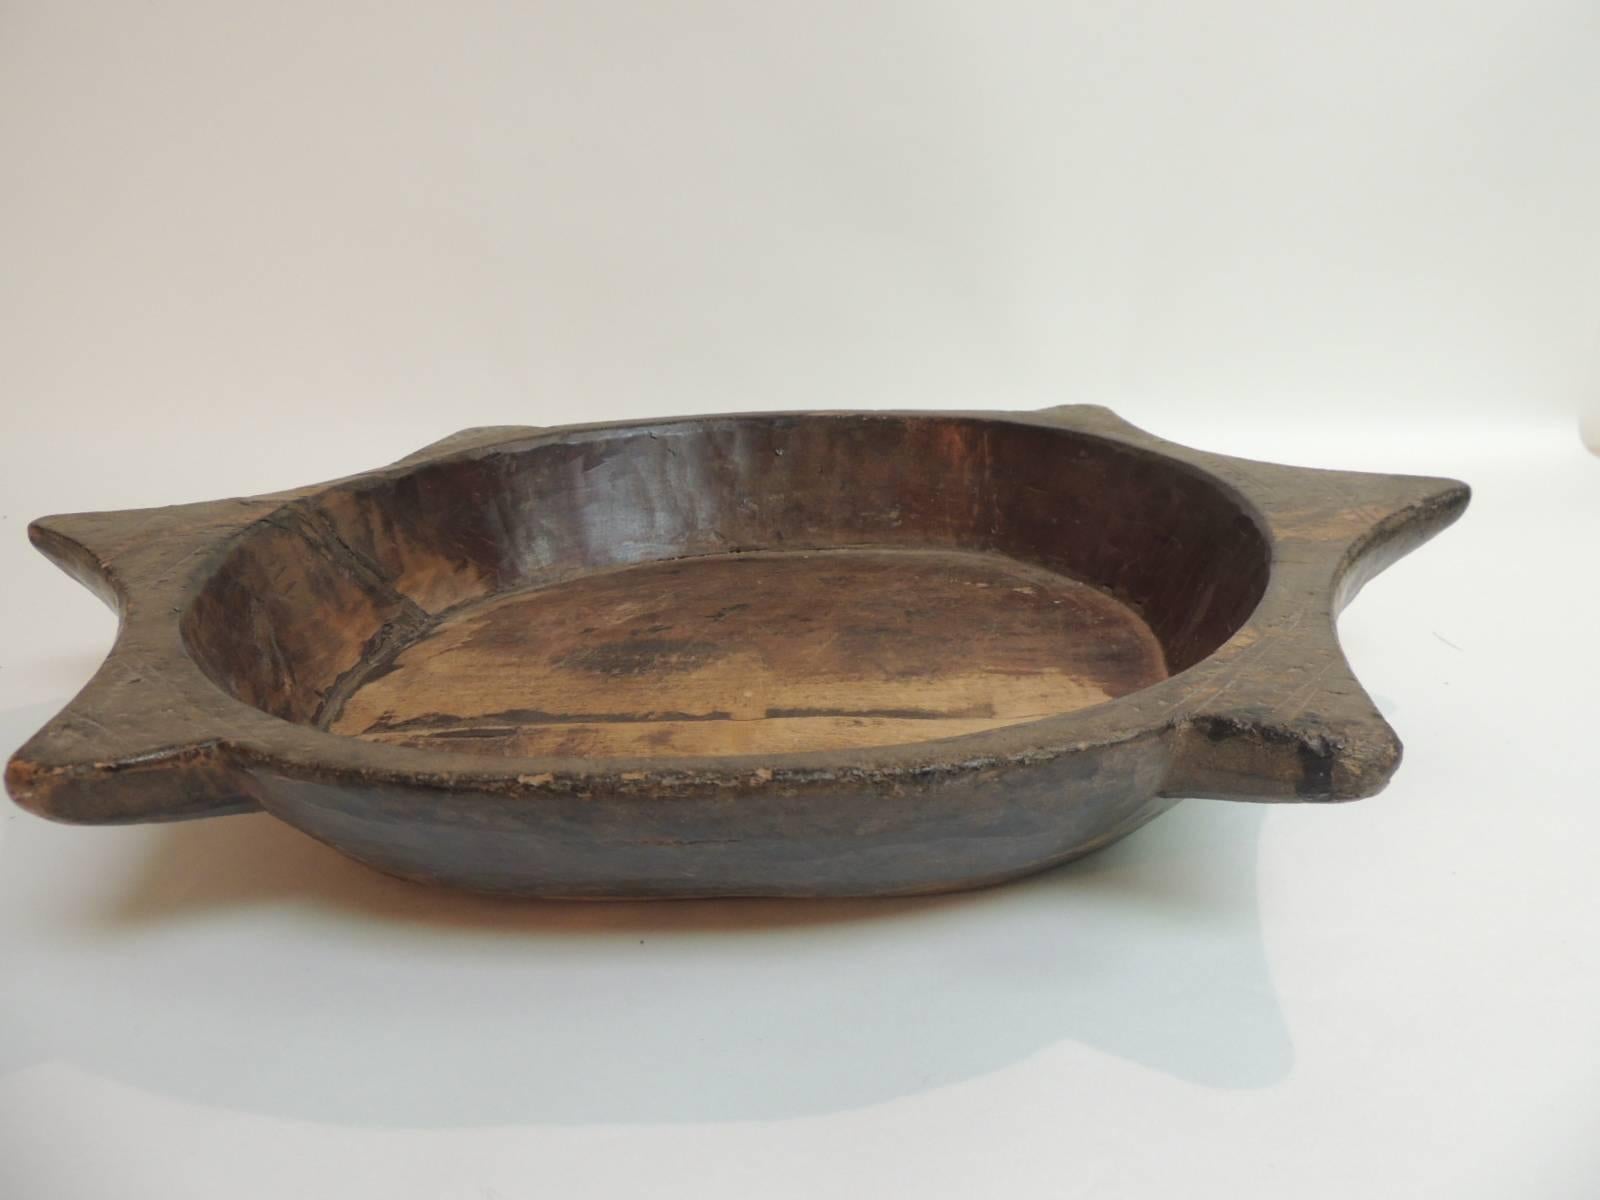 Offered by the Antique Textiles Galleries:
African hand-carved wood bowl.
Wood used to handcraft these rustic African bowls can vary and sometimes we get them in carved out of Kiaat wood and is found throughout the South of the African continent.